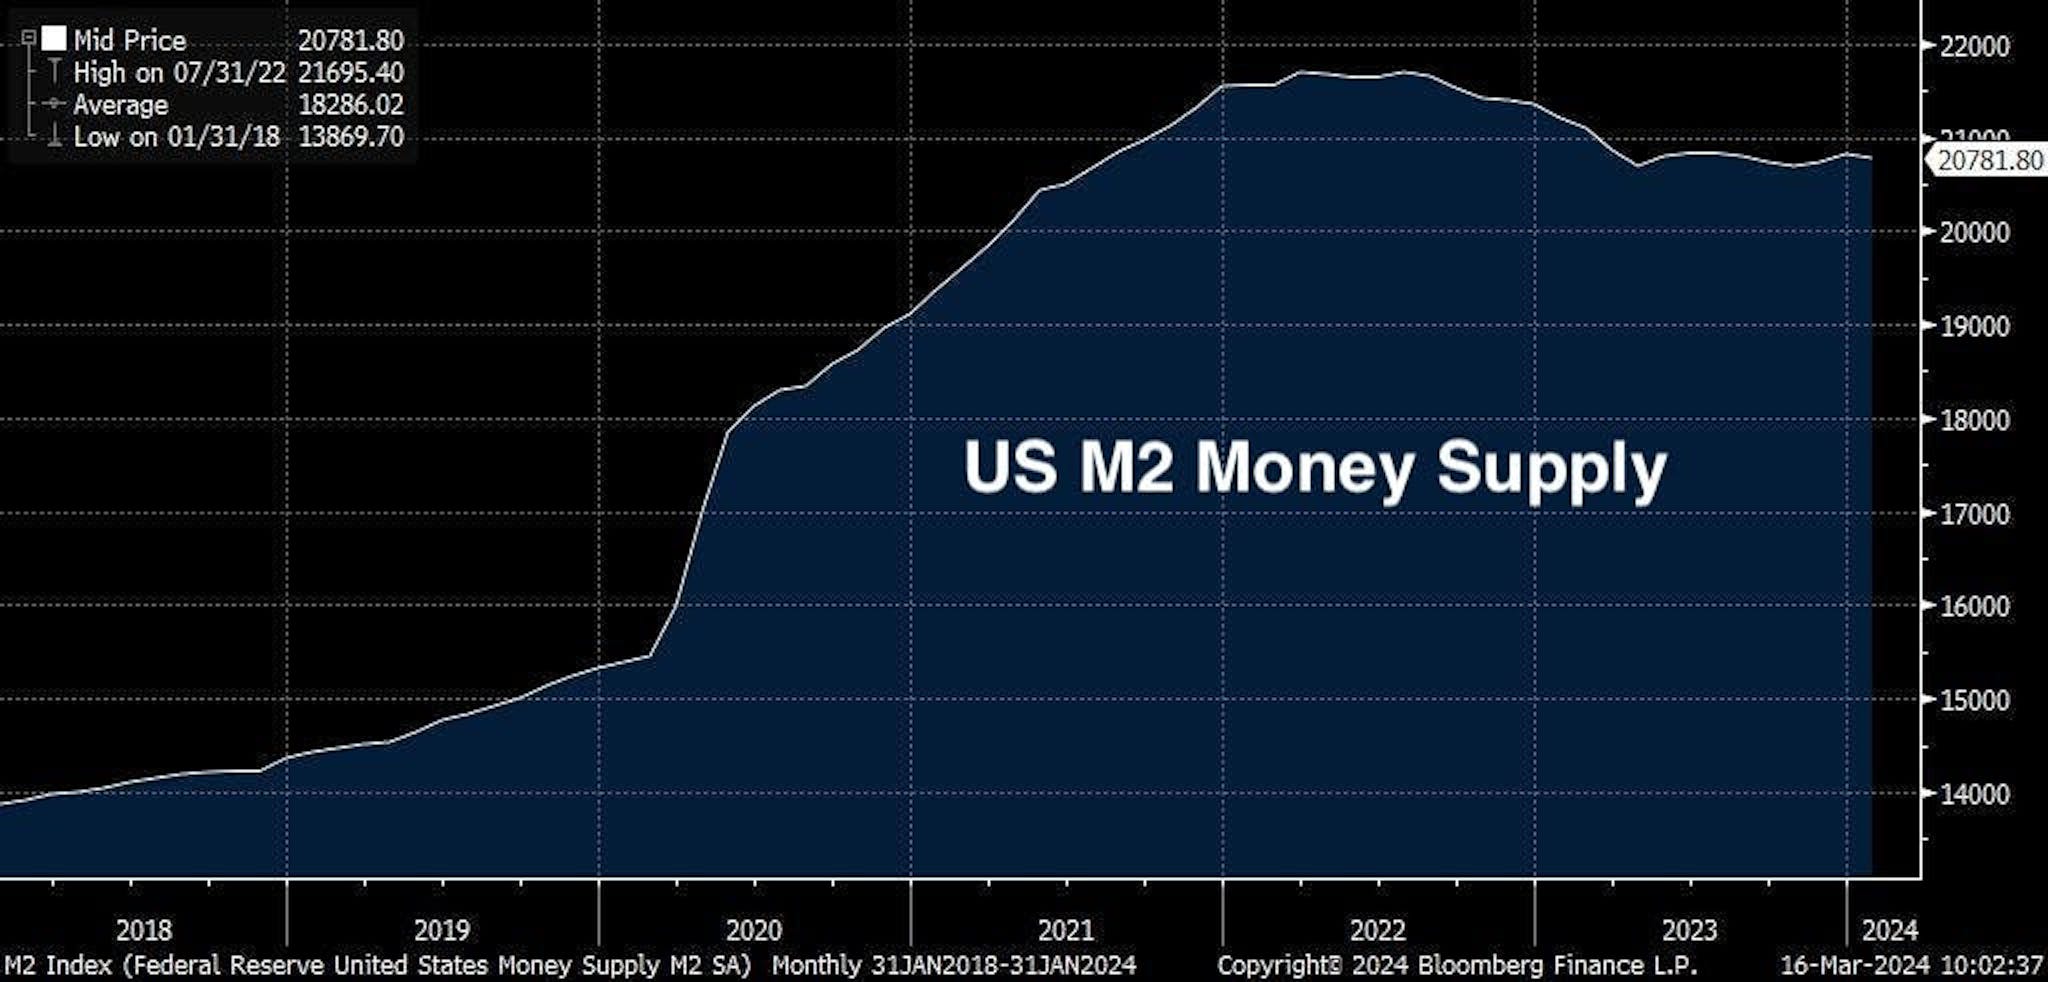 The M2 money supply which was in a downtrend from the middle of 2022 and into 2023 has now stopped falling completely.